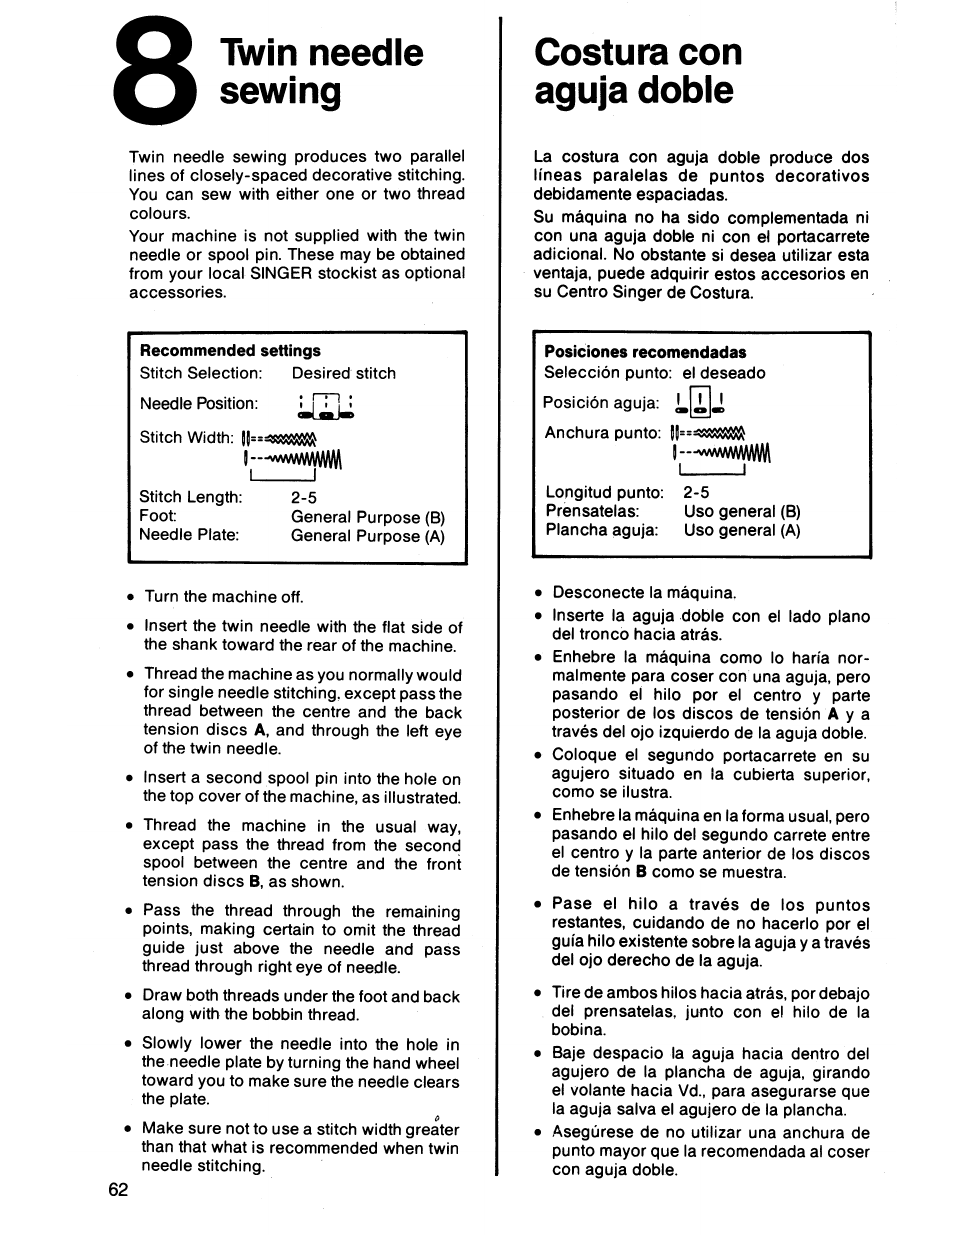 Twin needle sewing, Costura con aguja doble | SINGER 7011 User Manual | Page 62 / 78